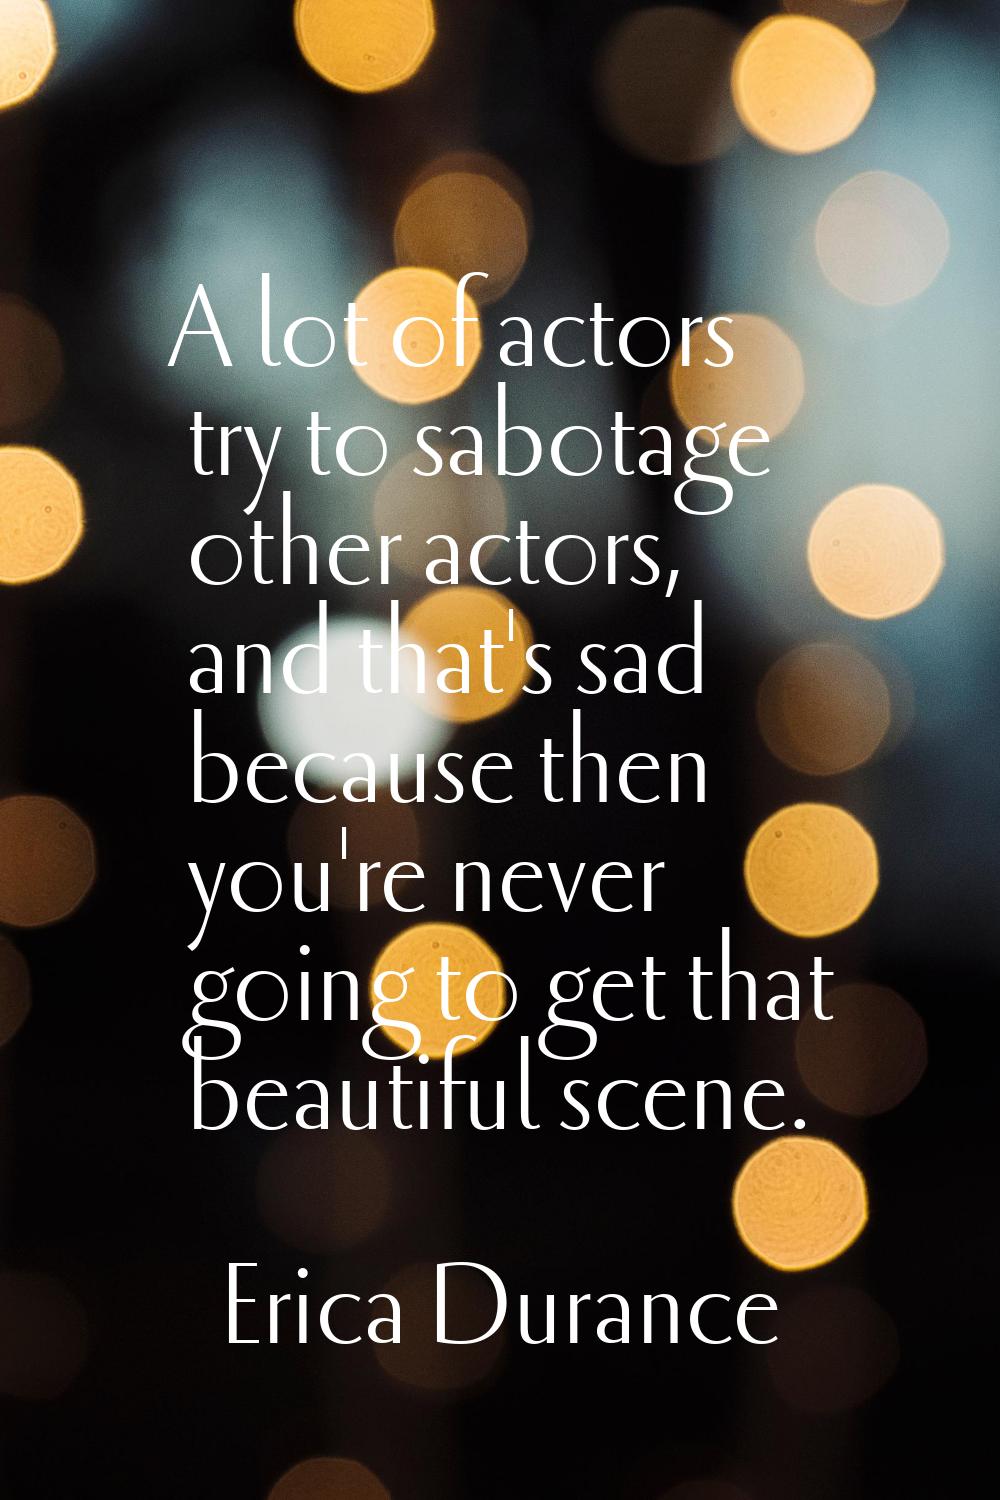 A lot of actors try to sabotage other actors, and that's sad because then you're never going to get